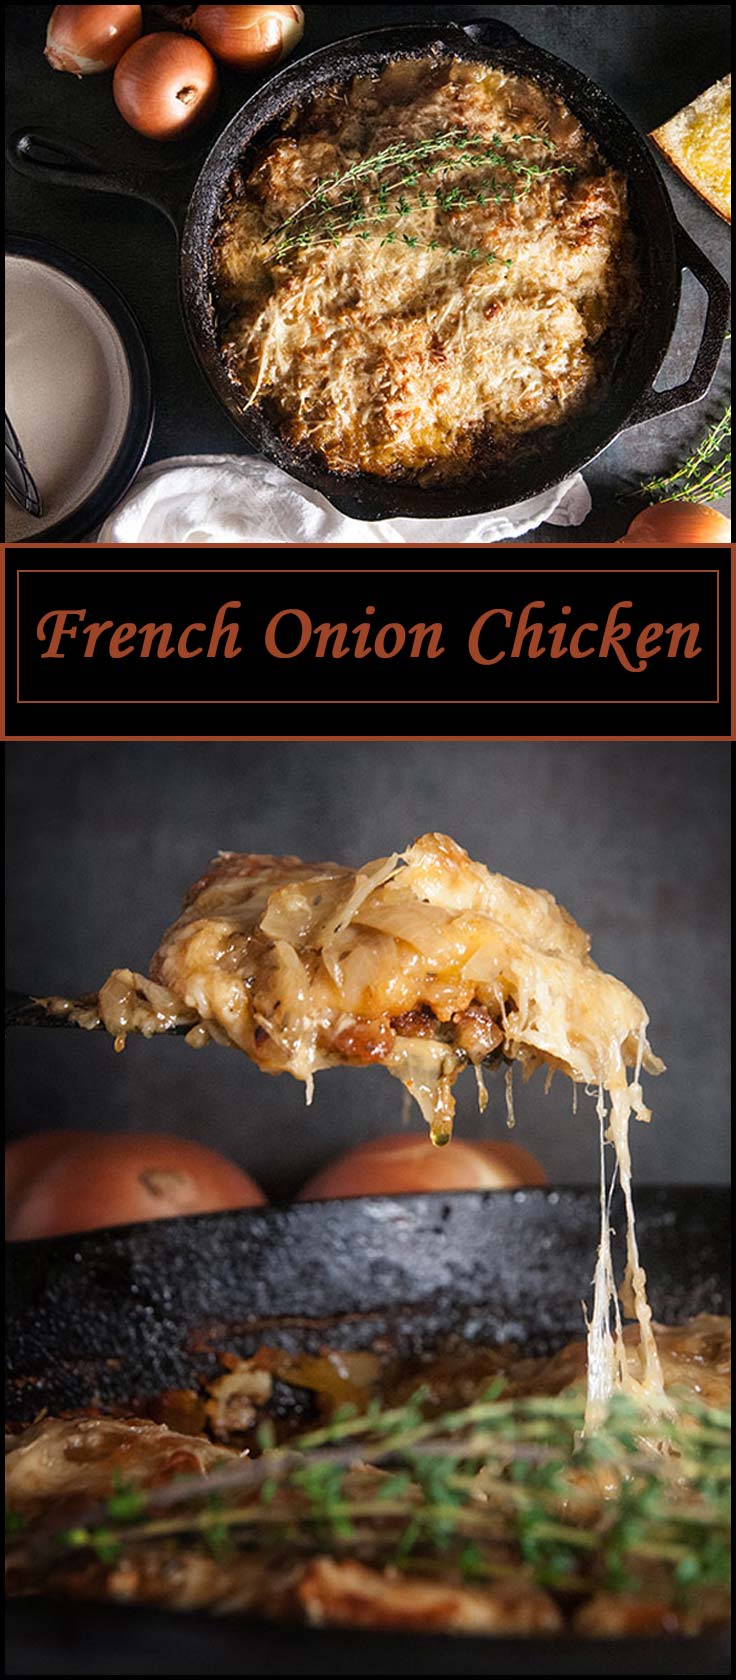 The perfect dinner party recipe French Onion Chicken from www.seasonedsprinkles.com